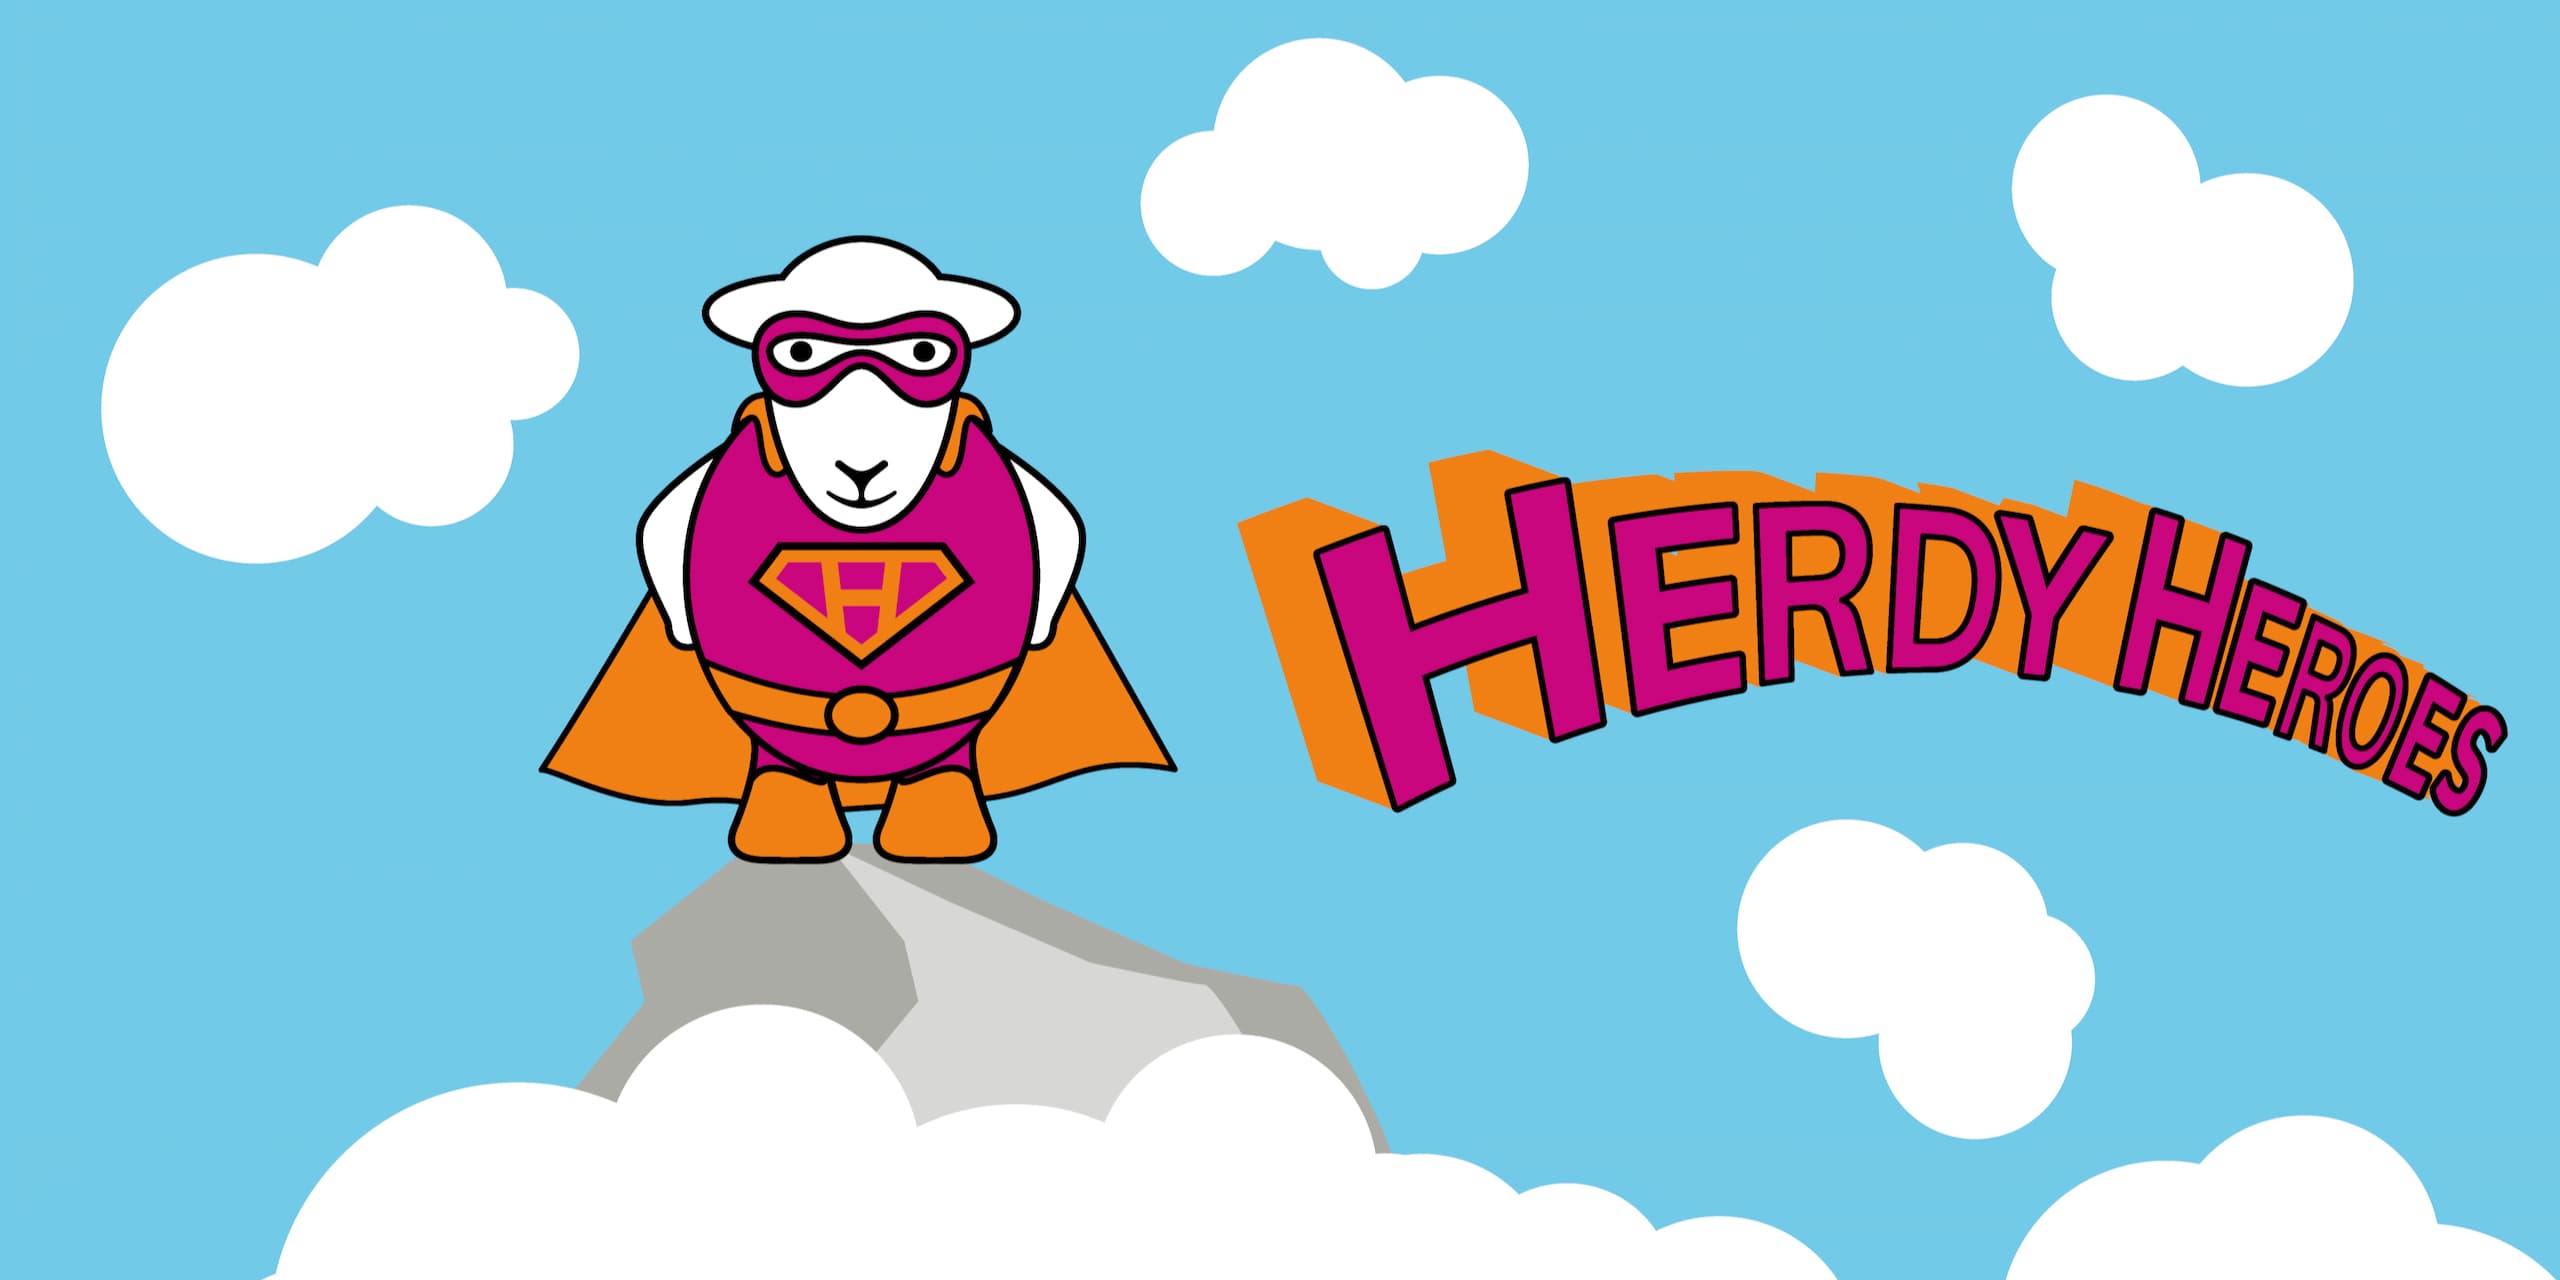 Herdy launches weekly "Herdy Heroes" campaign